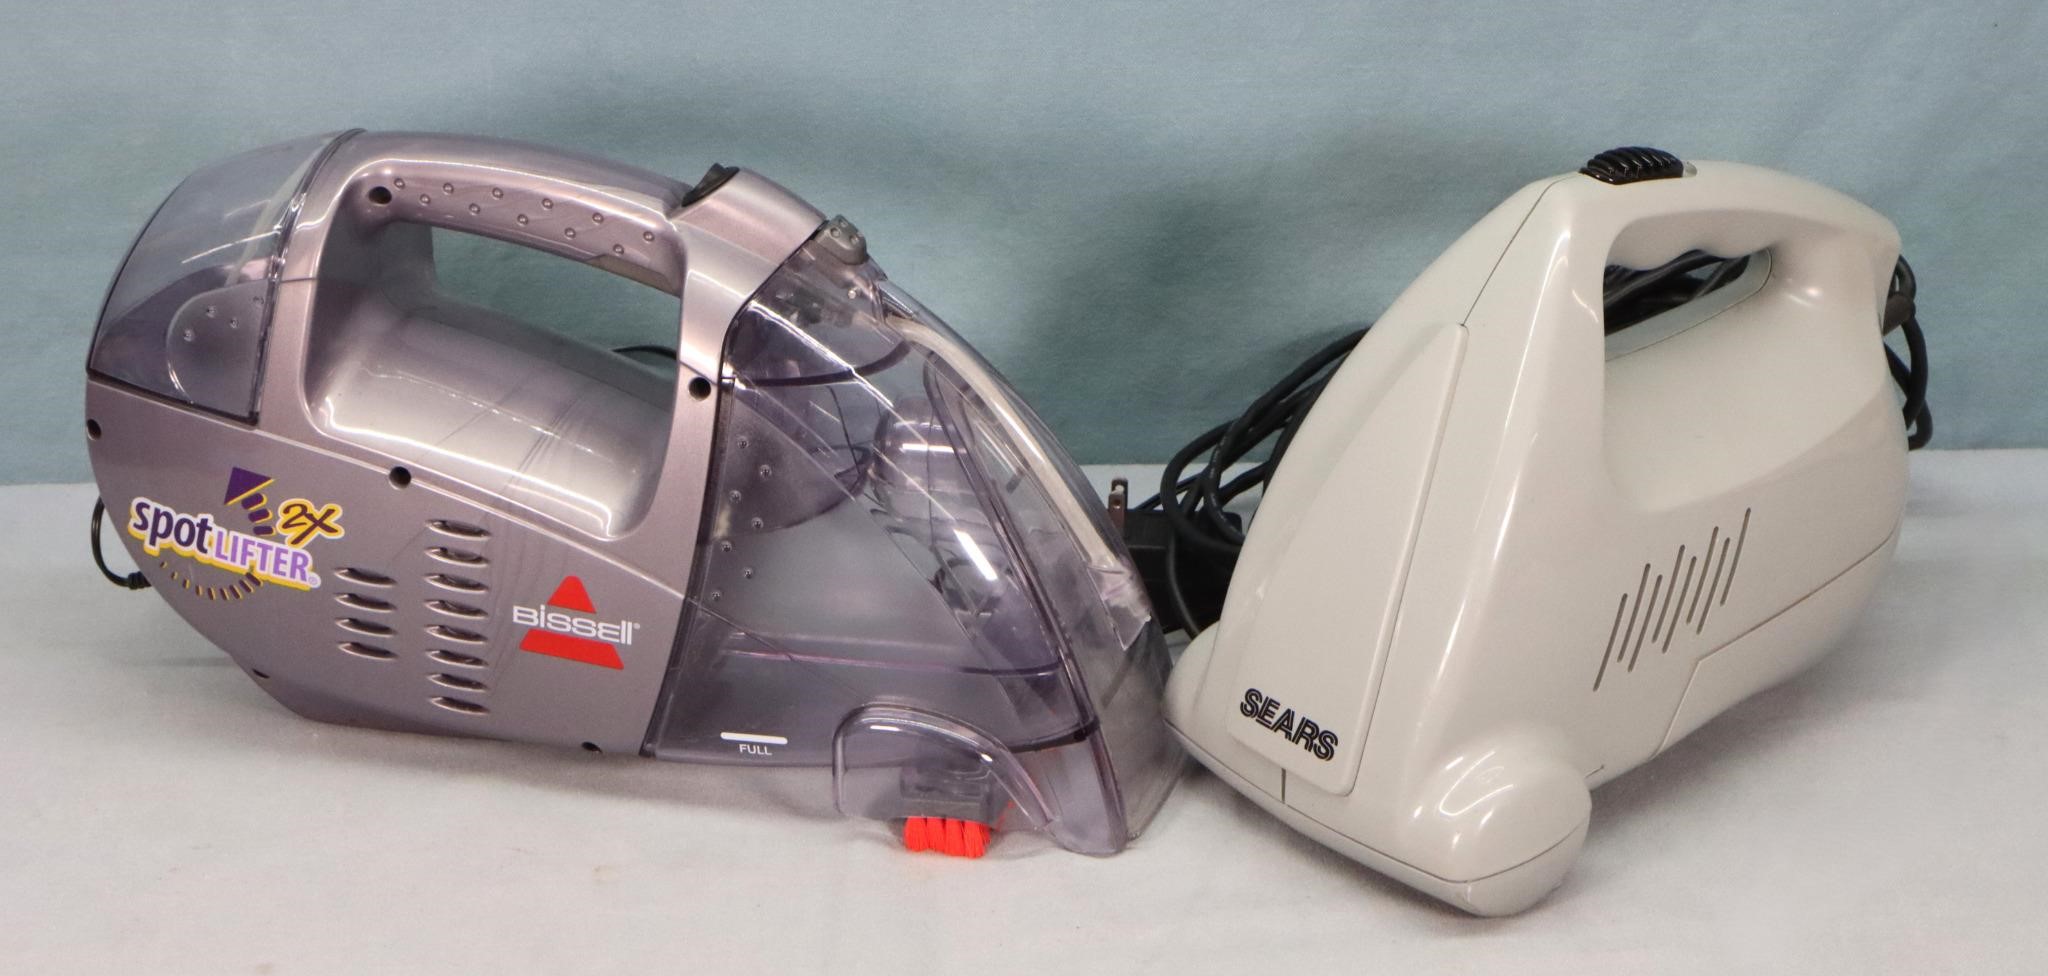 Bissell Spot Lifter + Sears Hand Vacuum